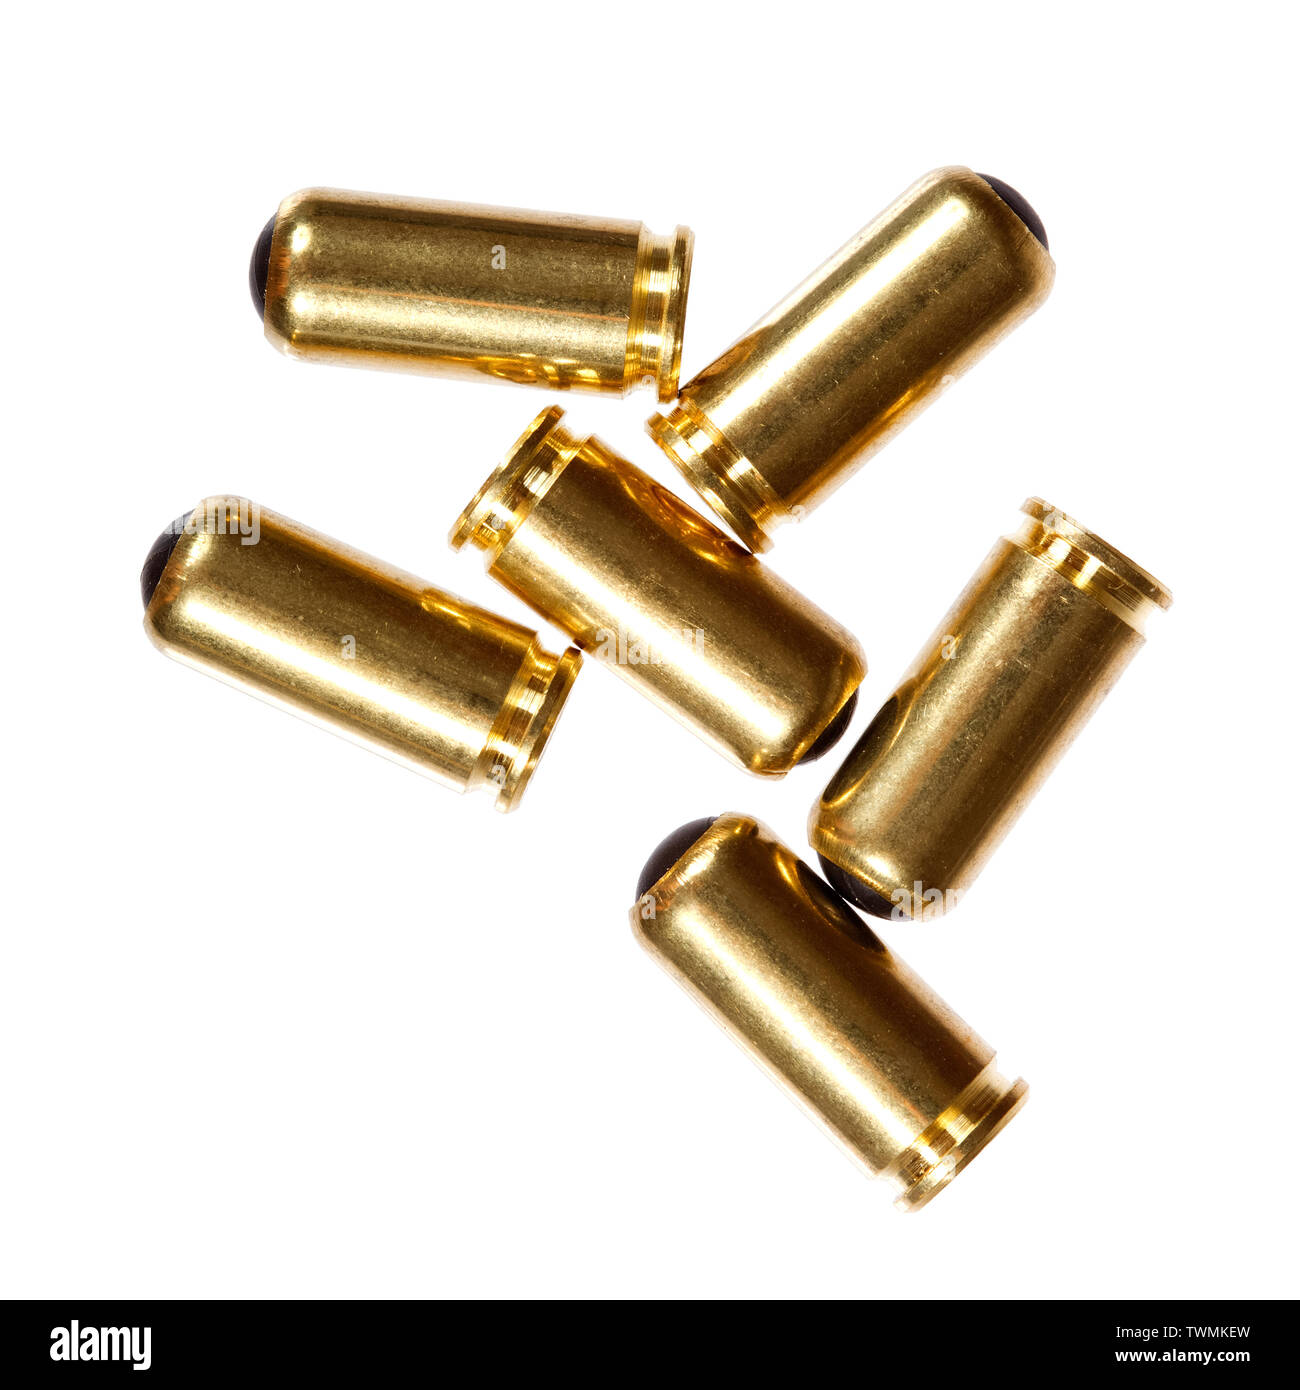 Close-up of 9mm bullet isolated on white background. Stock Photo